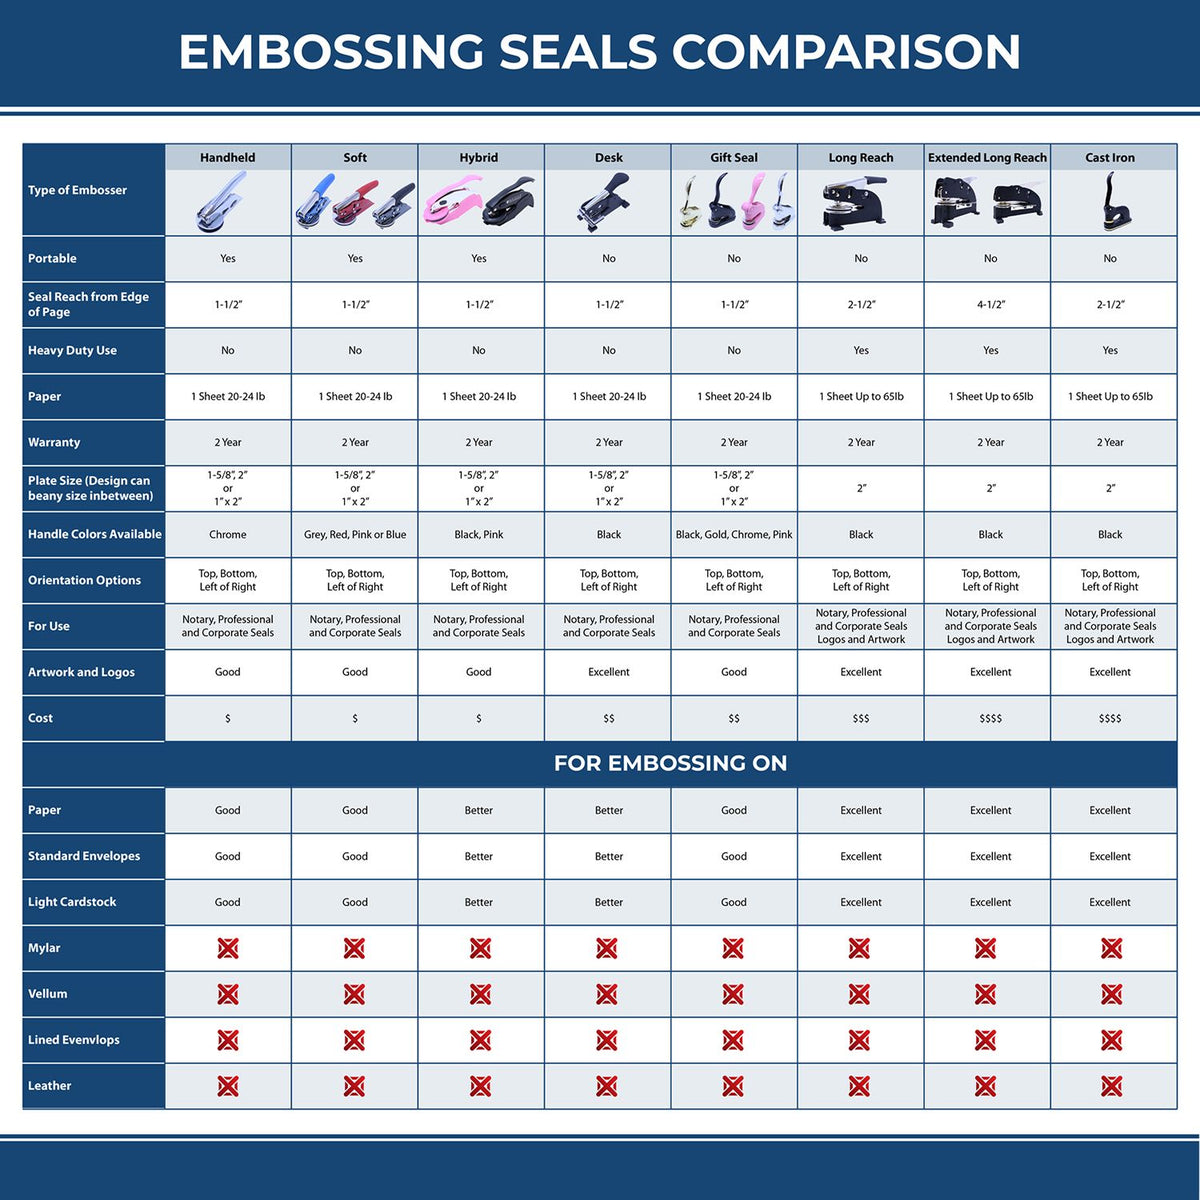 A comparison chart for the different types of mount models available for the Connecticut Geologist Desk Seal